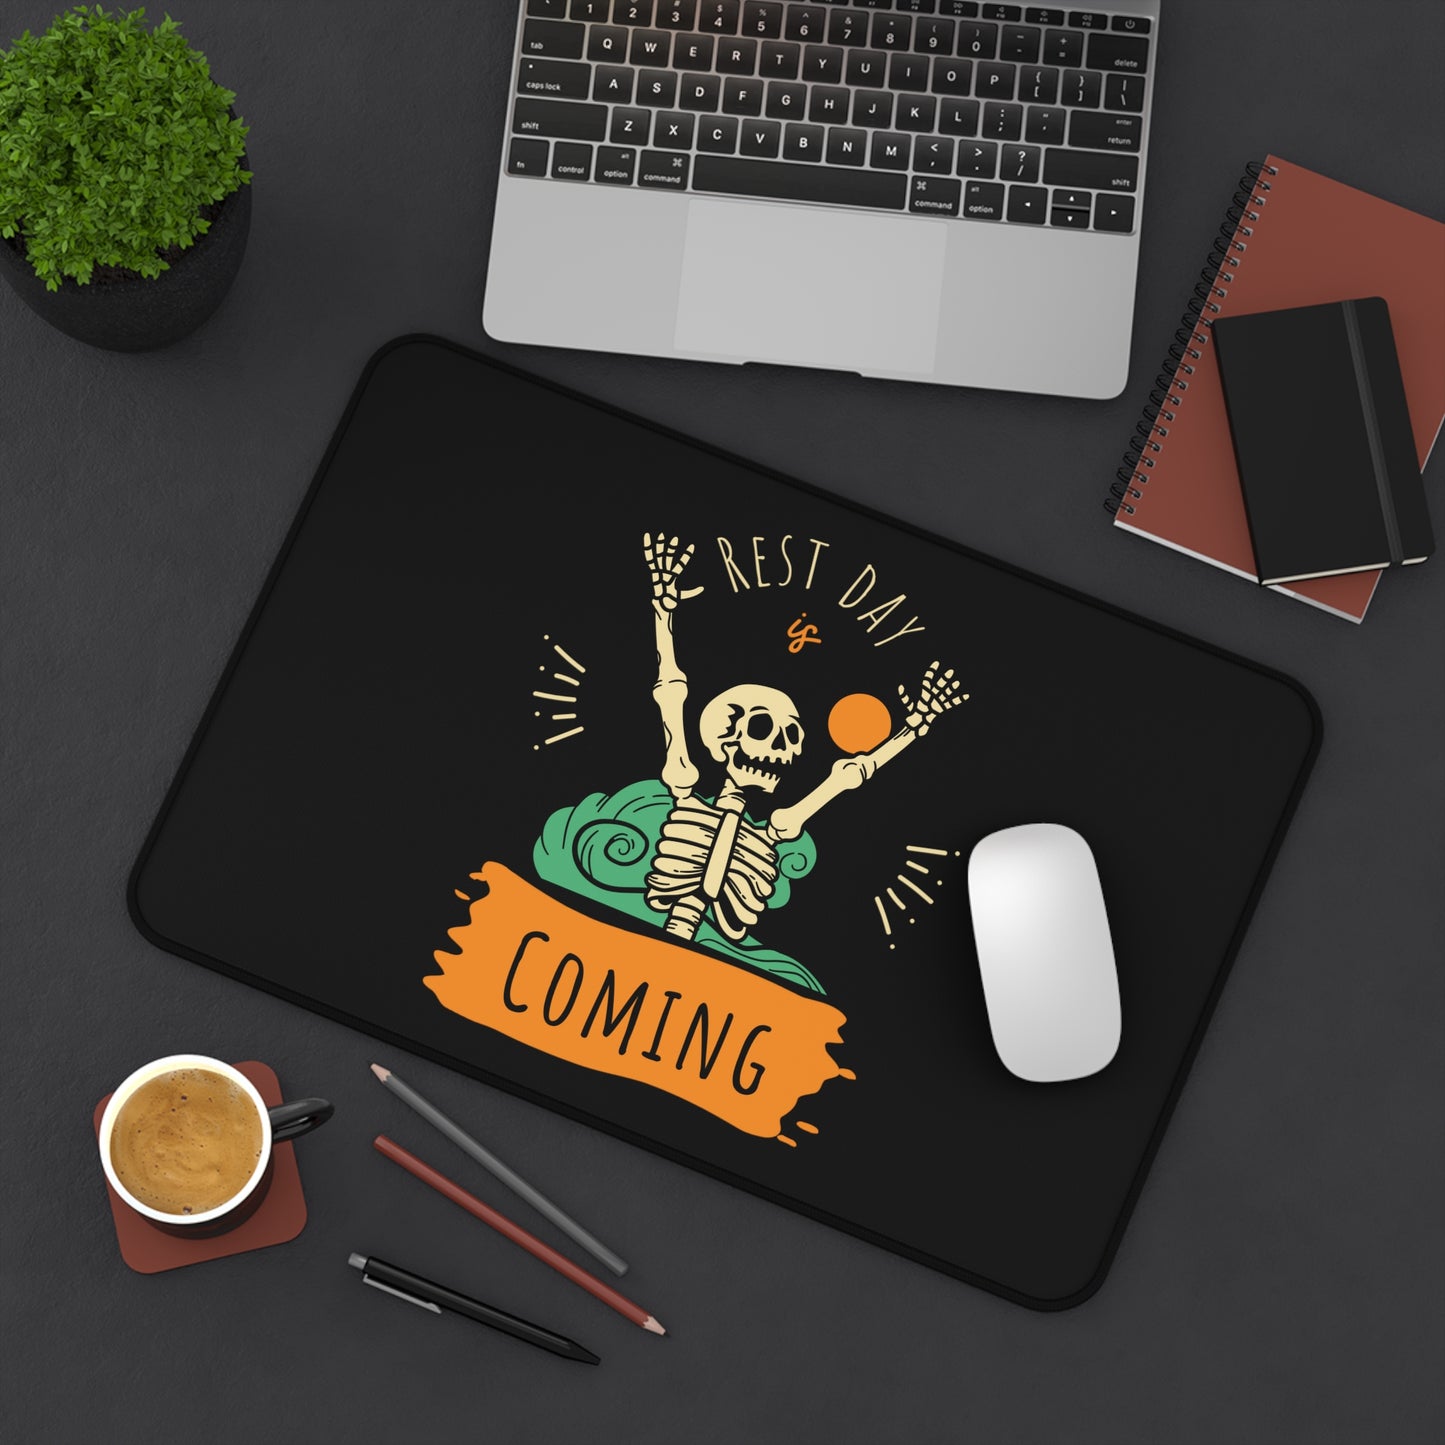 Rest Day is coming Desk Mat